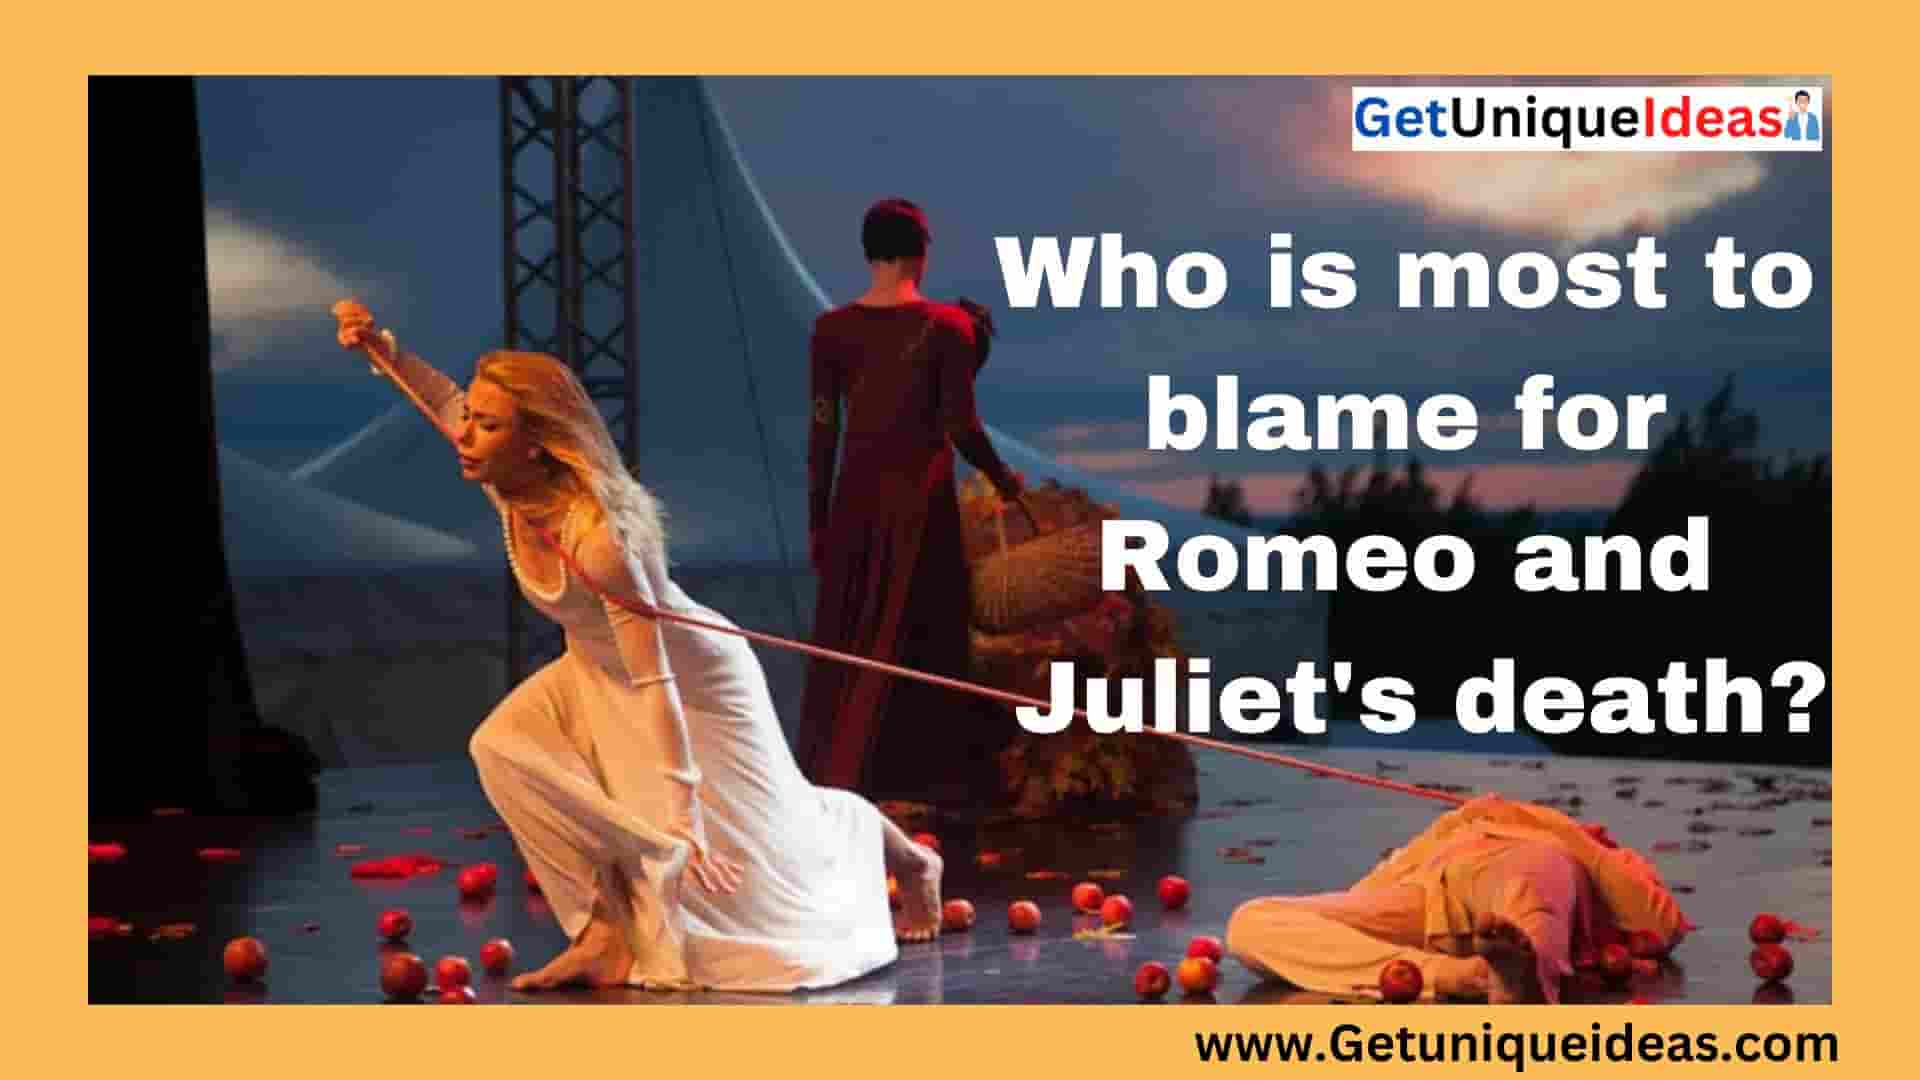 Who is to blame for Romeo and Juliet's deaths?